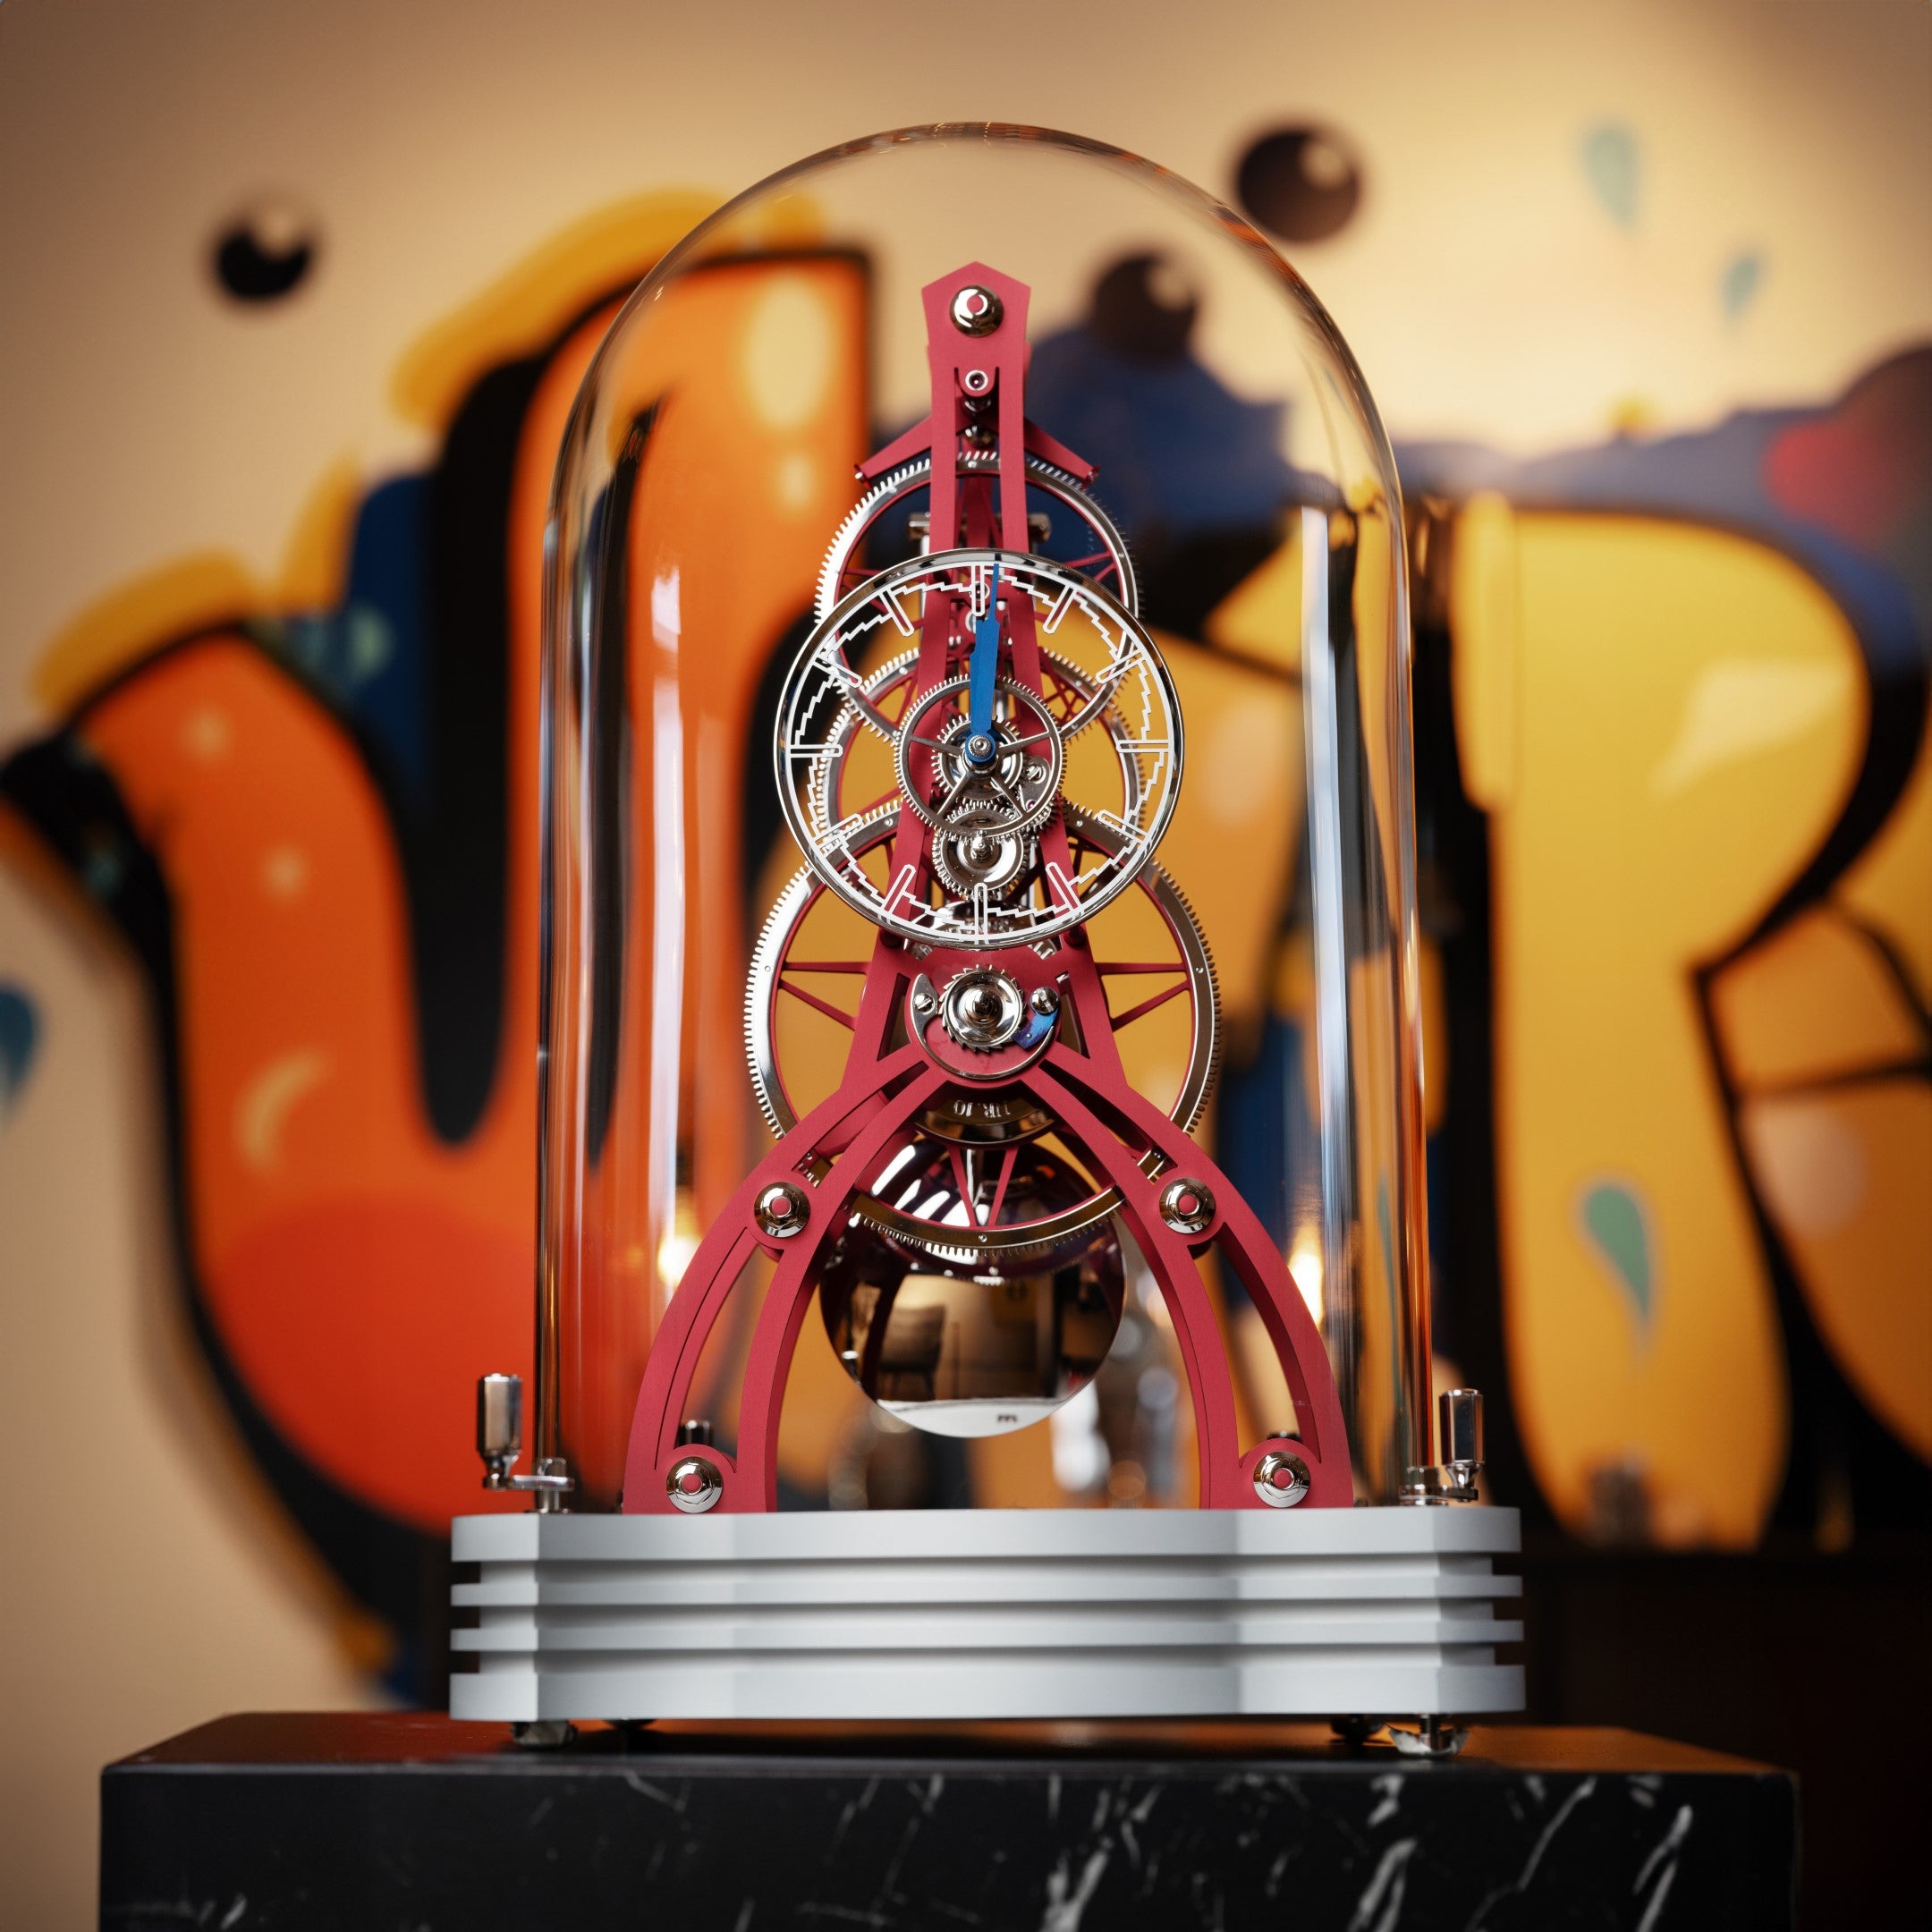 Luxurious German-made desk clock from the GPHG award-winning NT 8 GT skeleton collection.